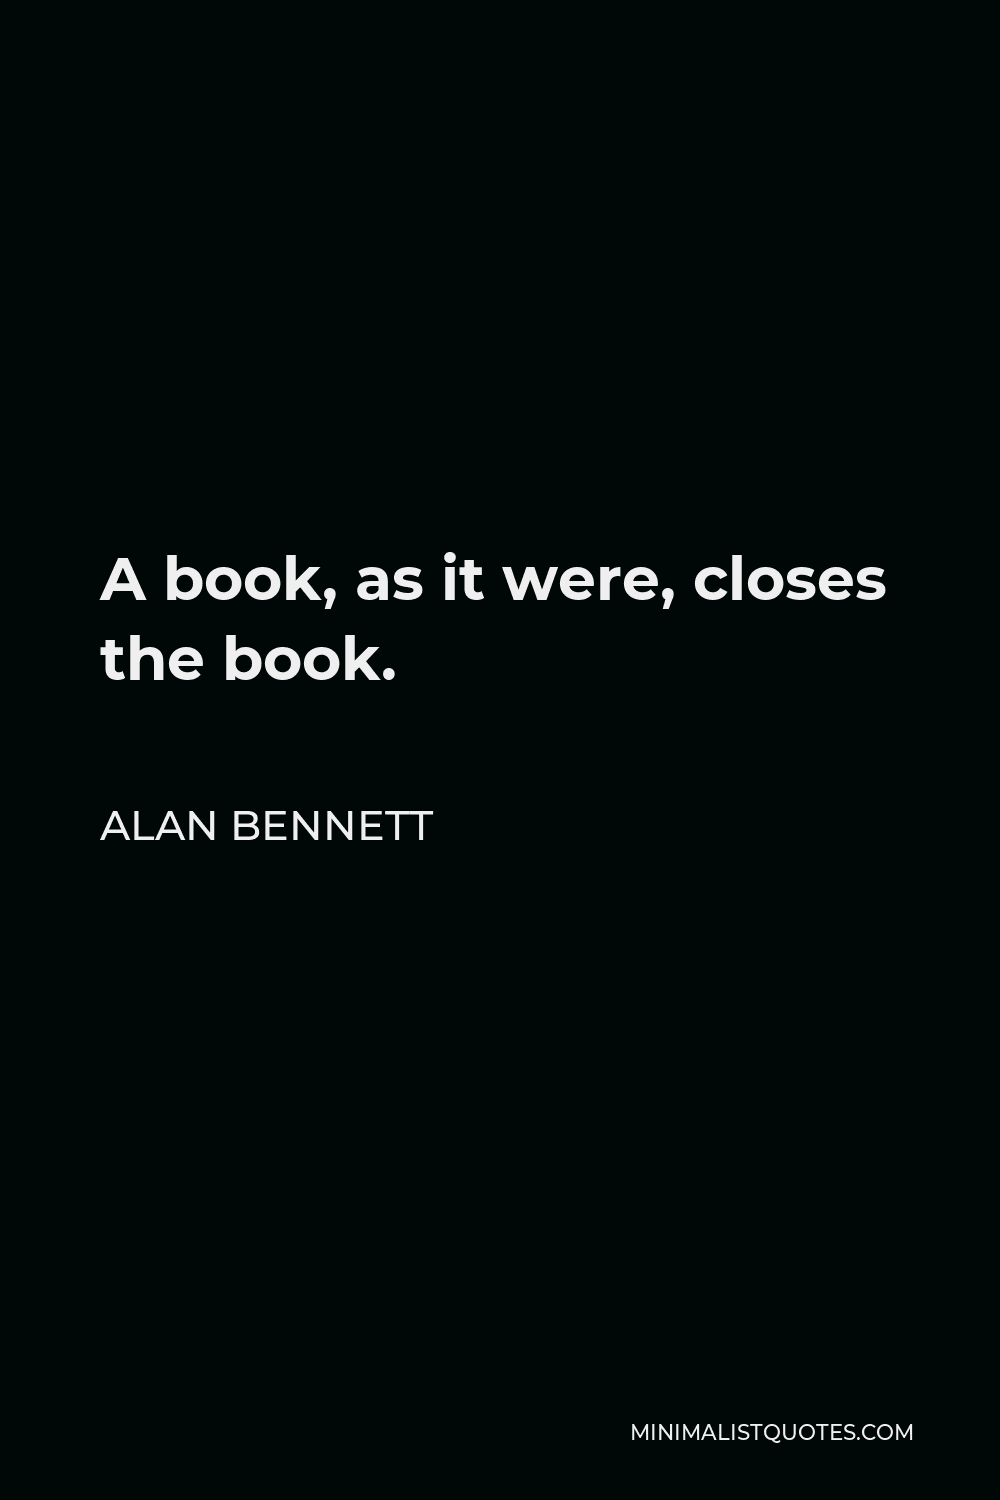 Alan Bennett Quote - A book, as it were, closes the book.